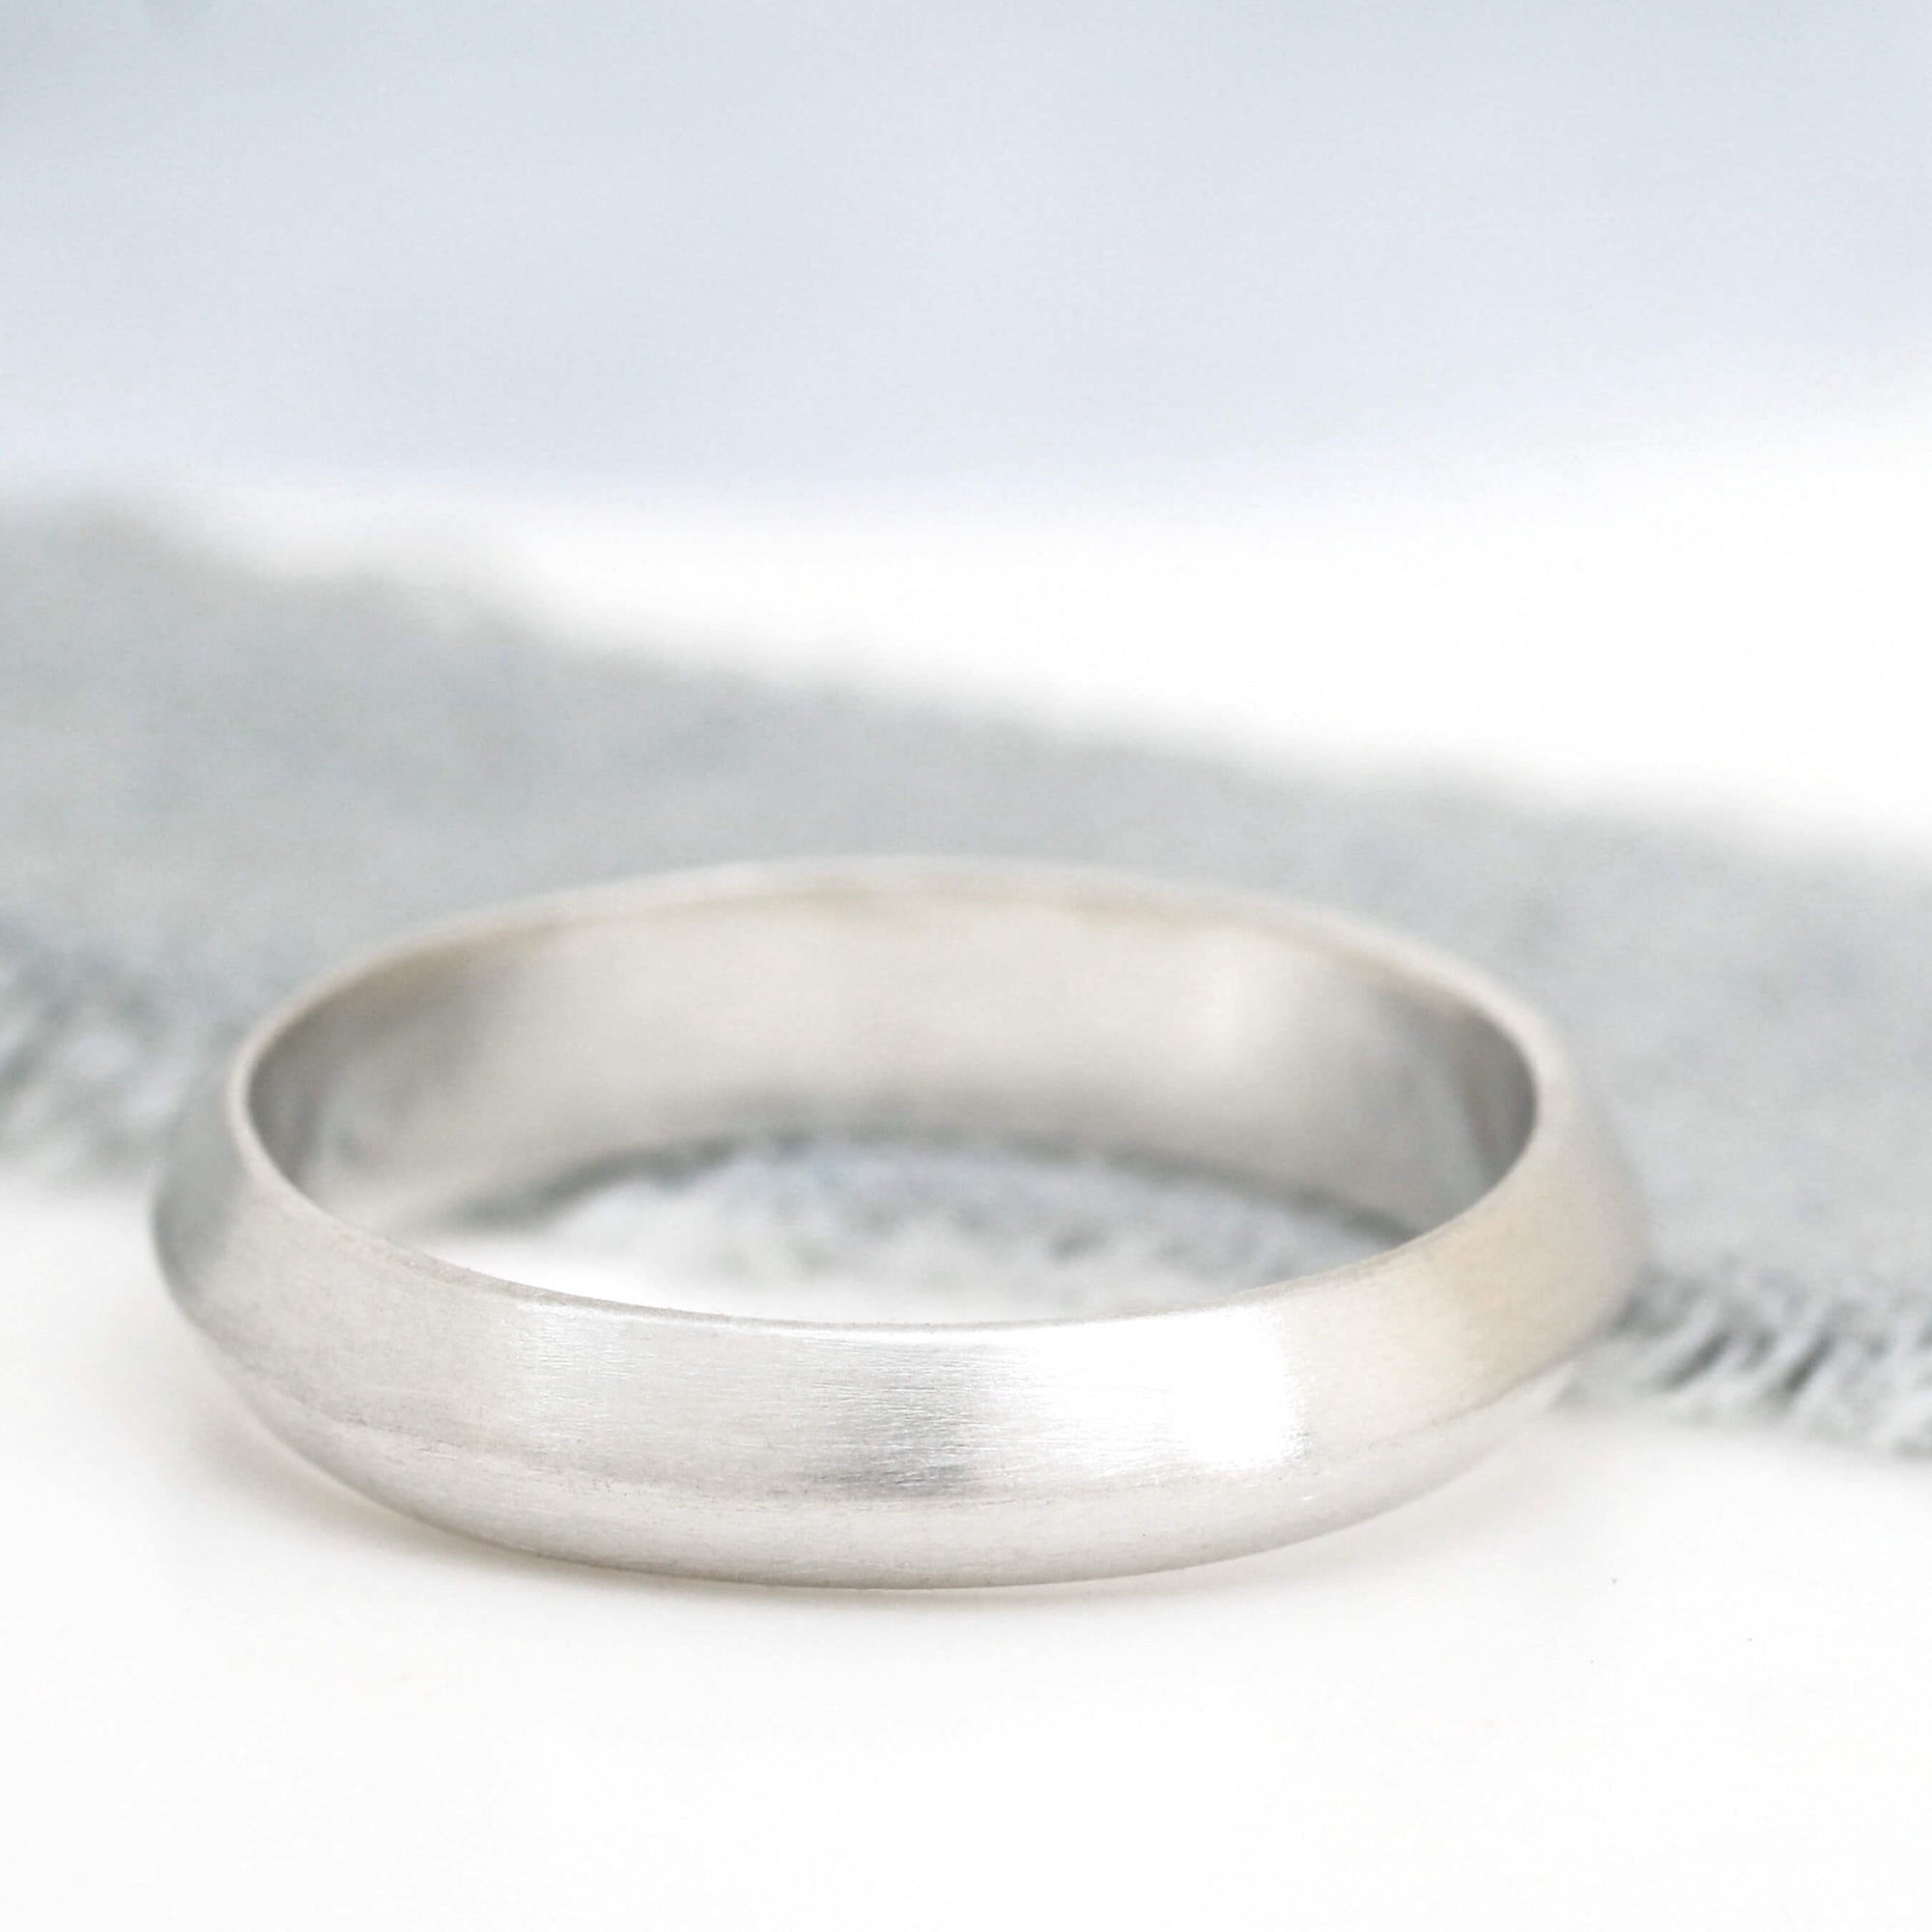 Sterling silver plain band rings. Silver wedding band